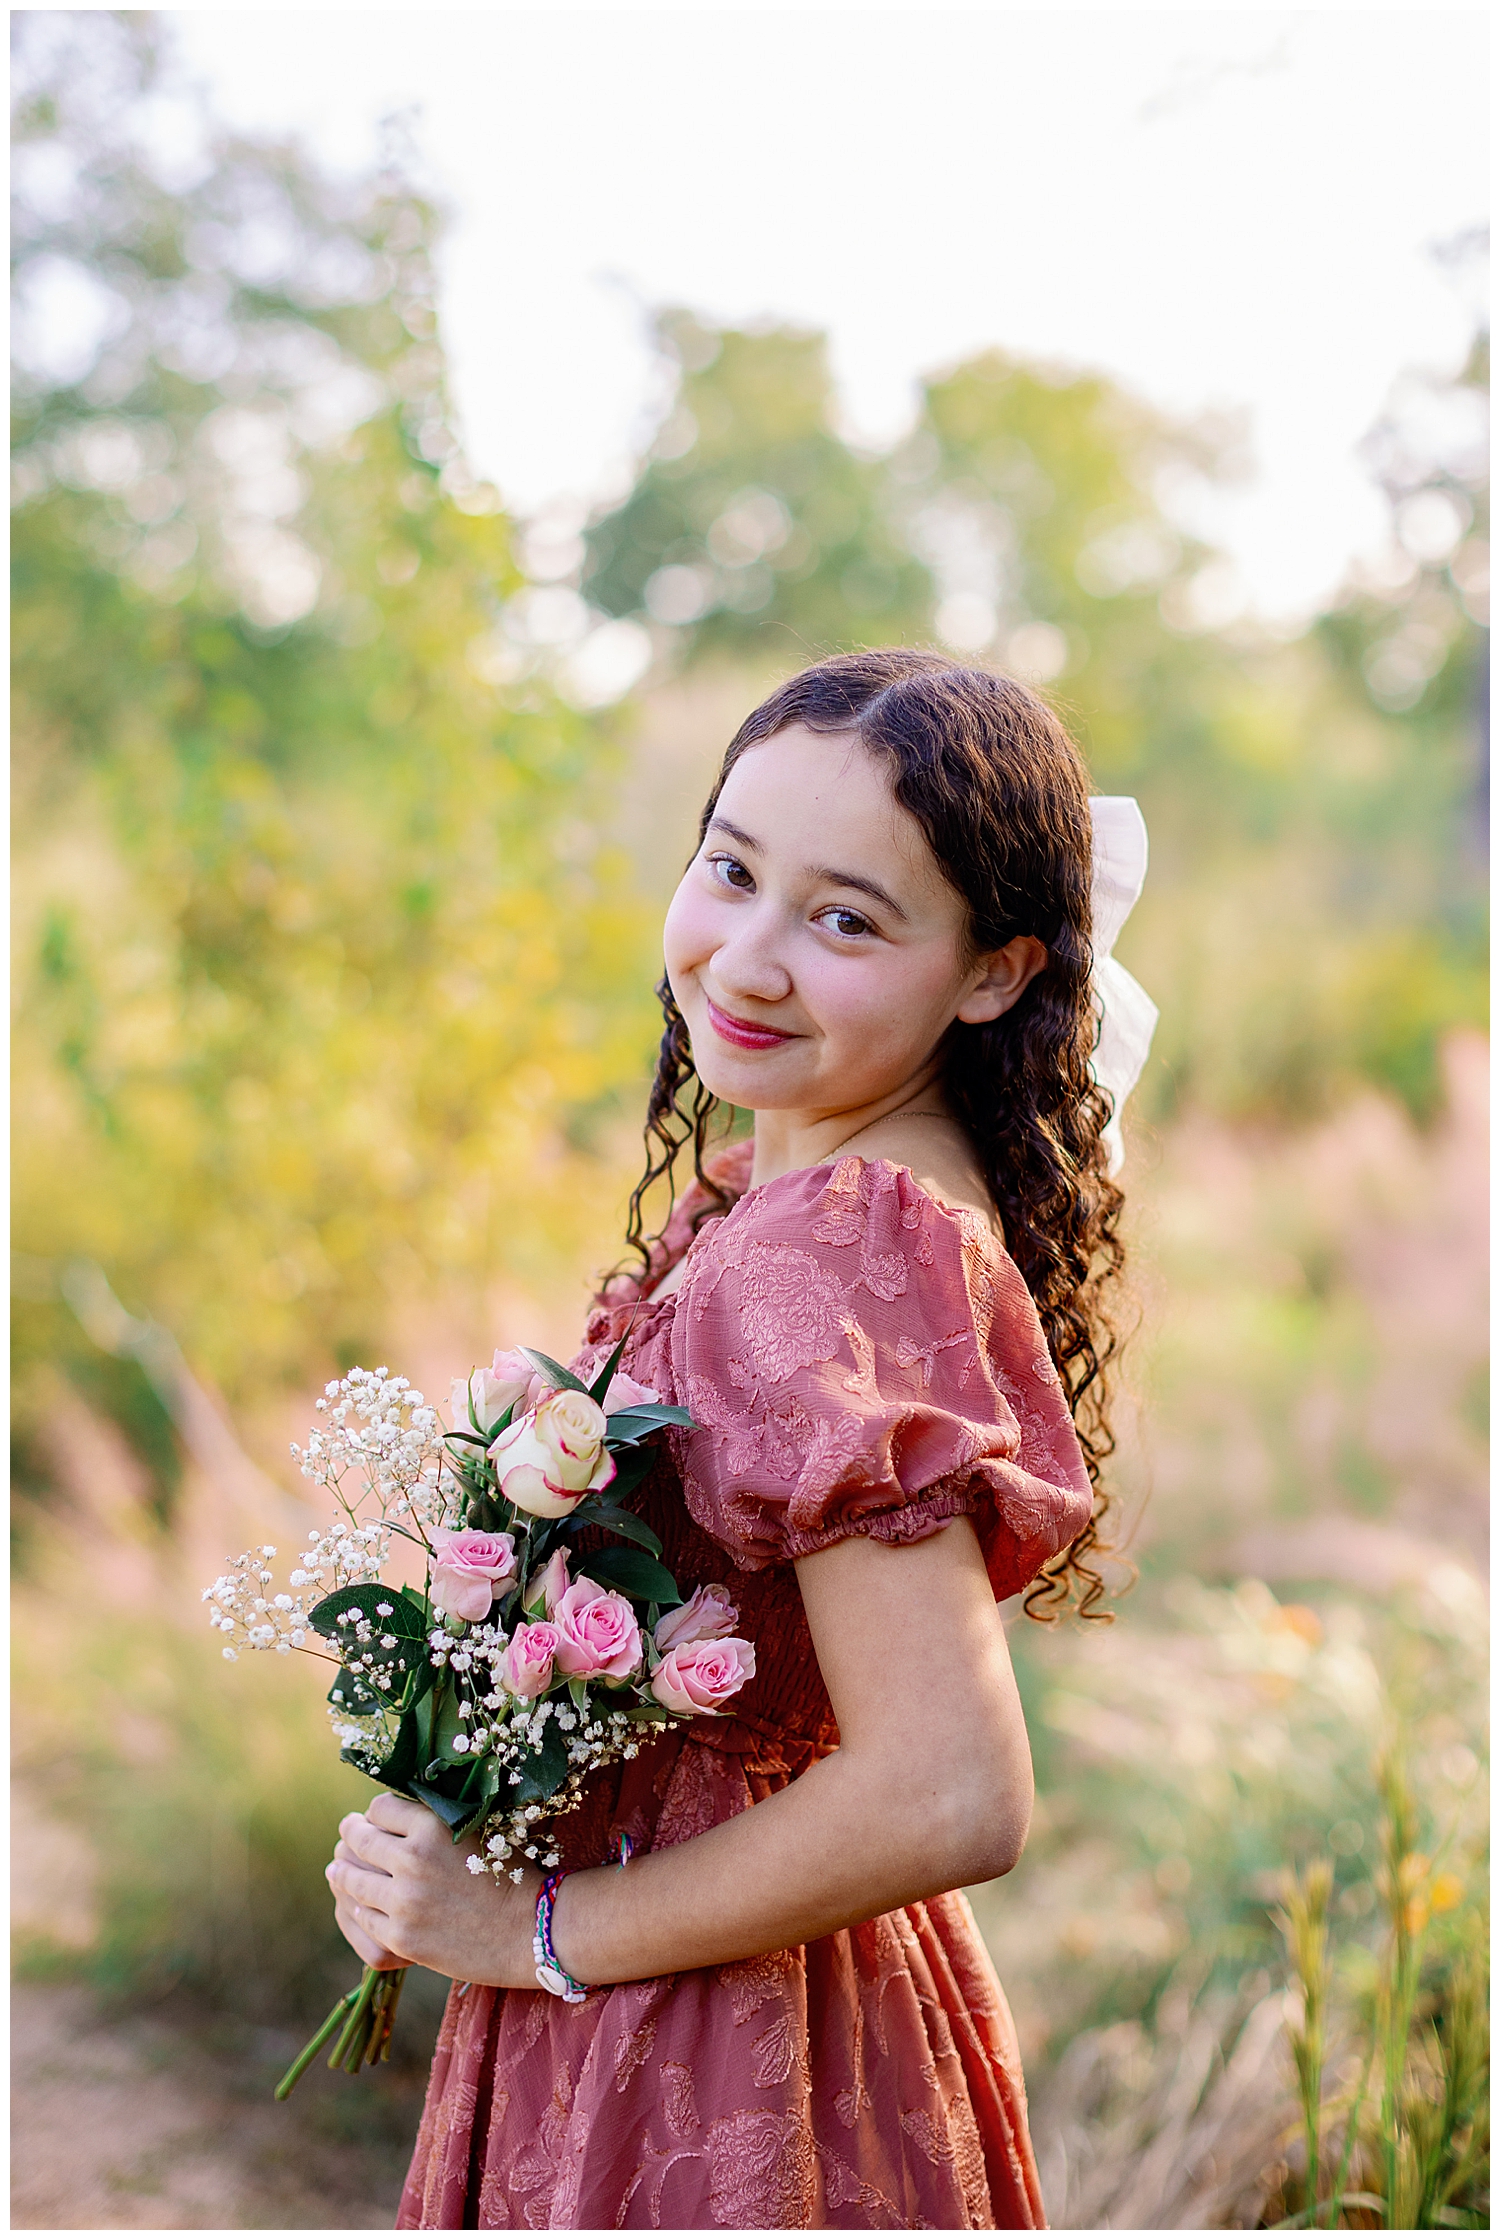 Houston senior pictures with flowers held by a girl in blush dress with white bow in hair